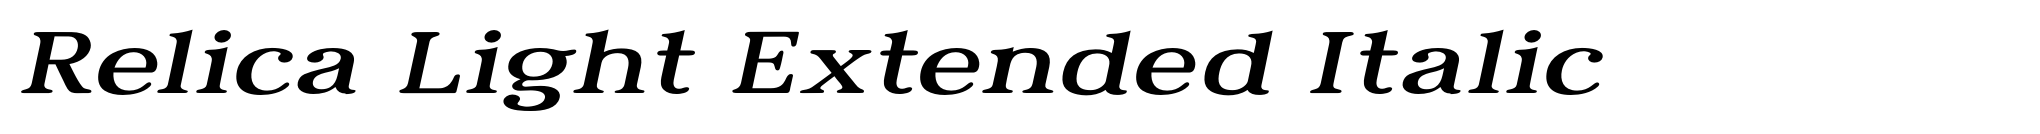 Relica Light Extended Italic image